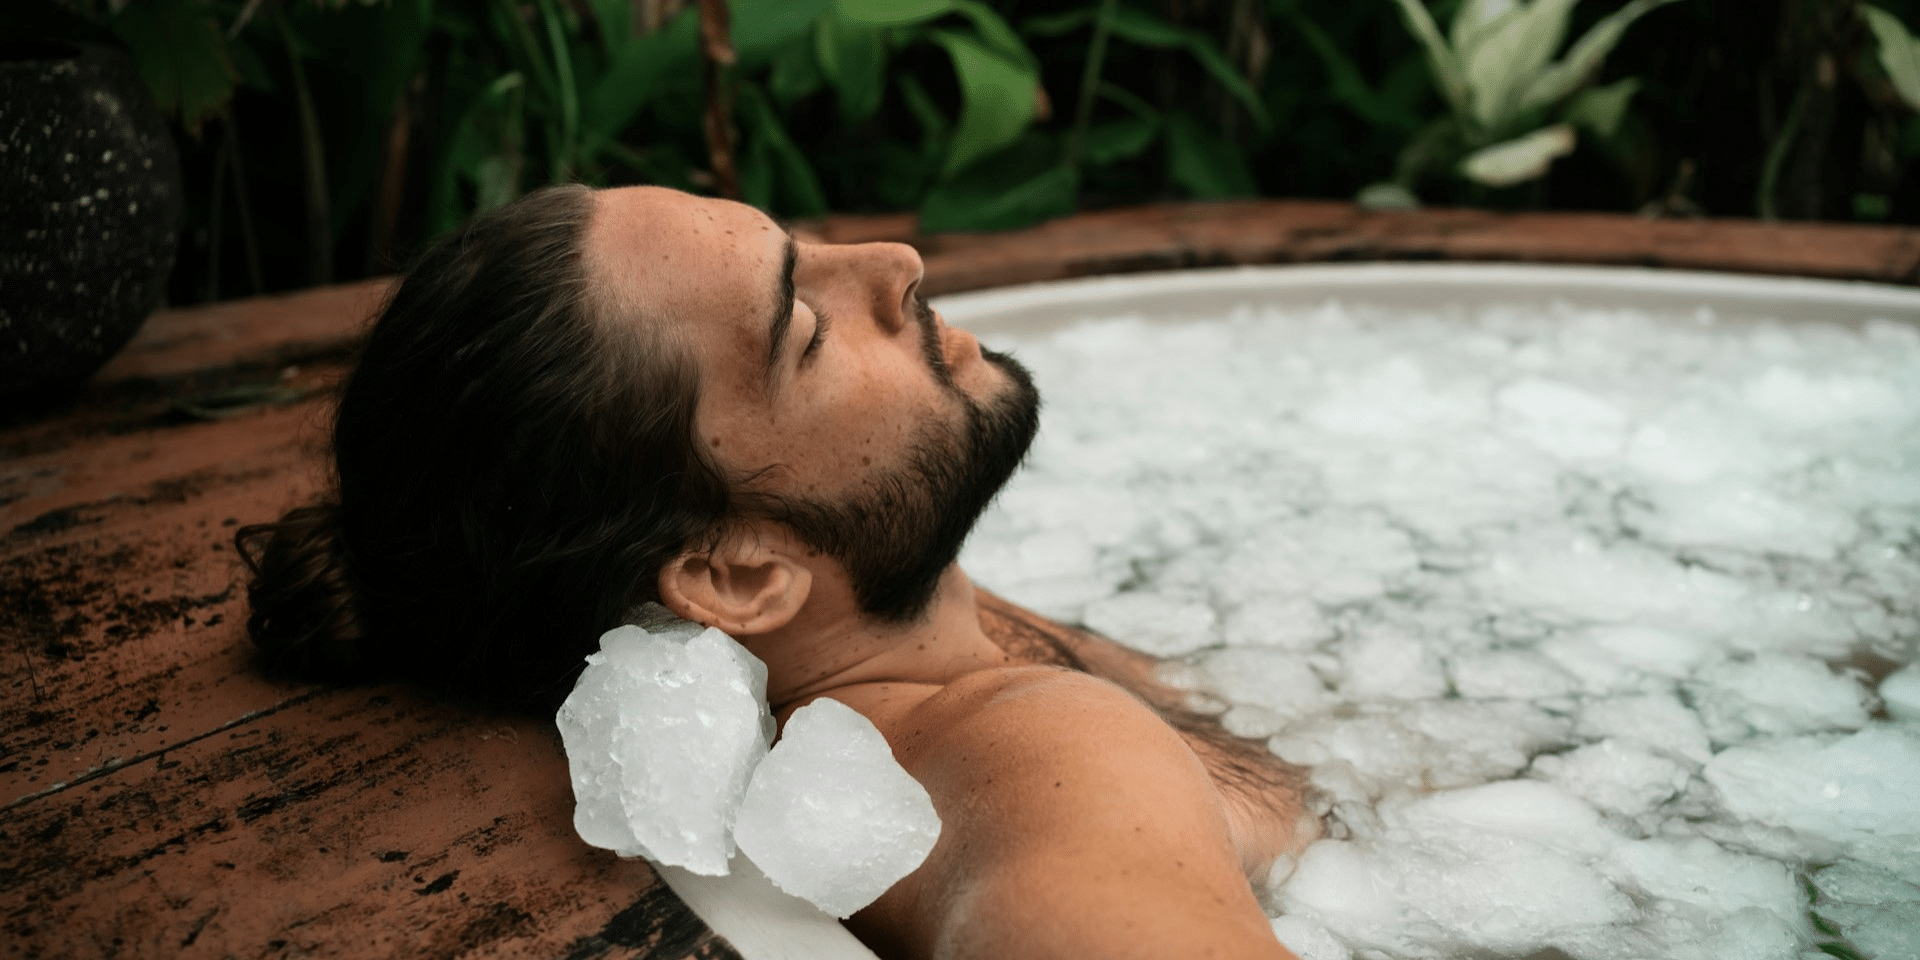 How Effective Are Ice Baths for Athletes